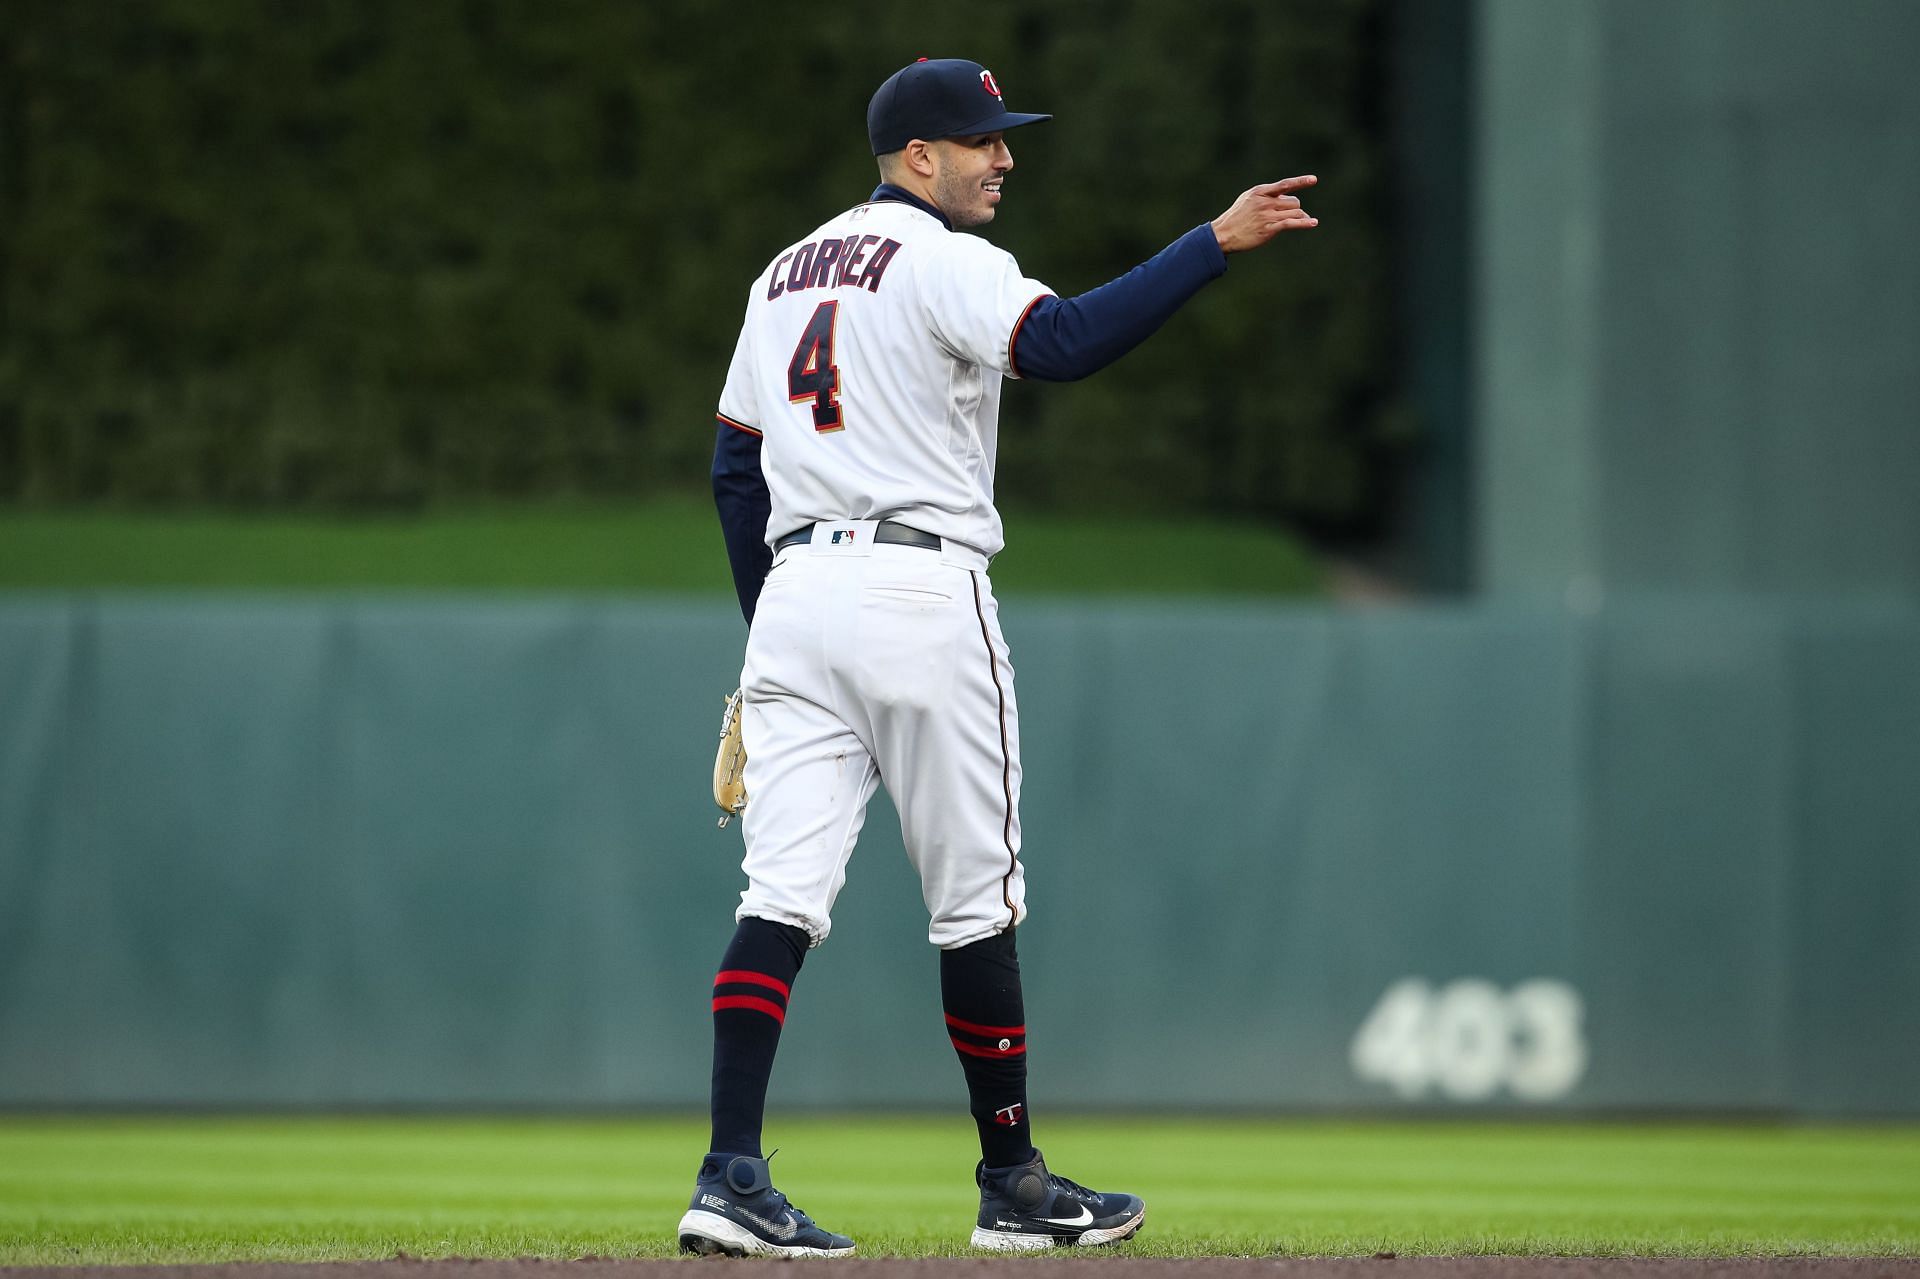 All-Star shortstop Carlos Correa is fitting in just fine with his new team, the Minnesota Twins, and has said as much to the media.